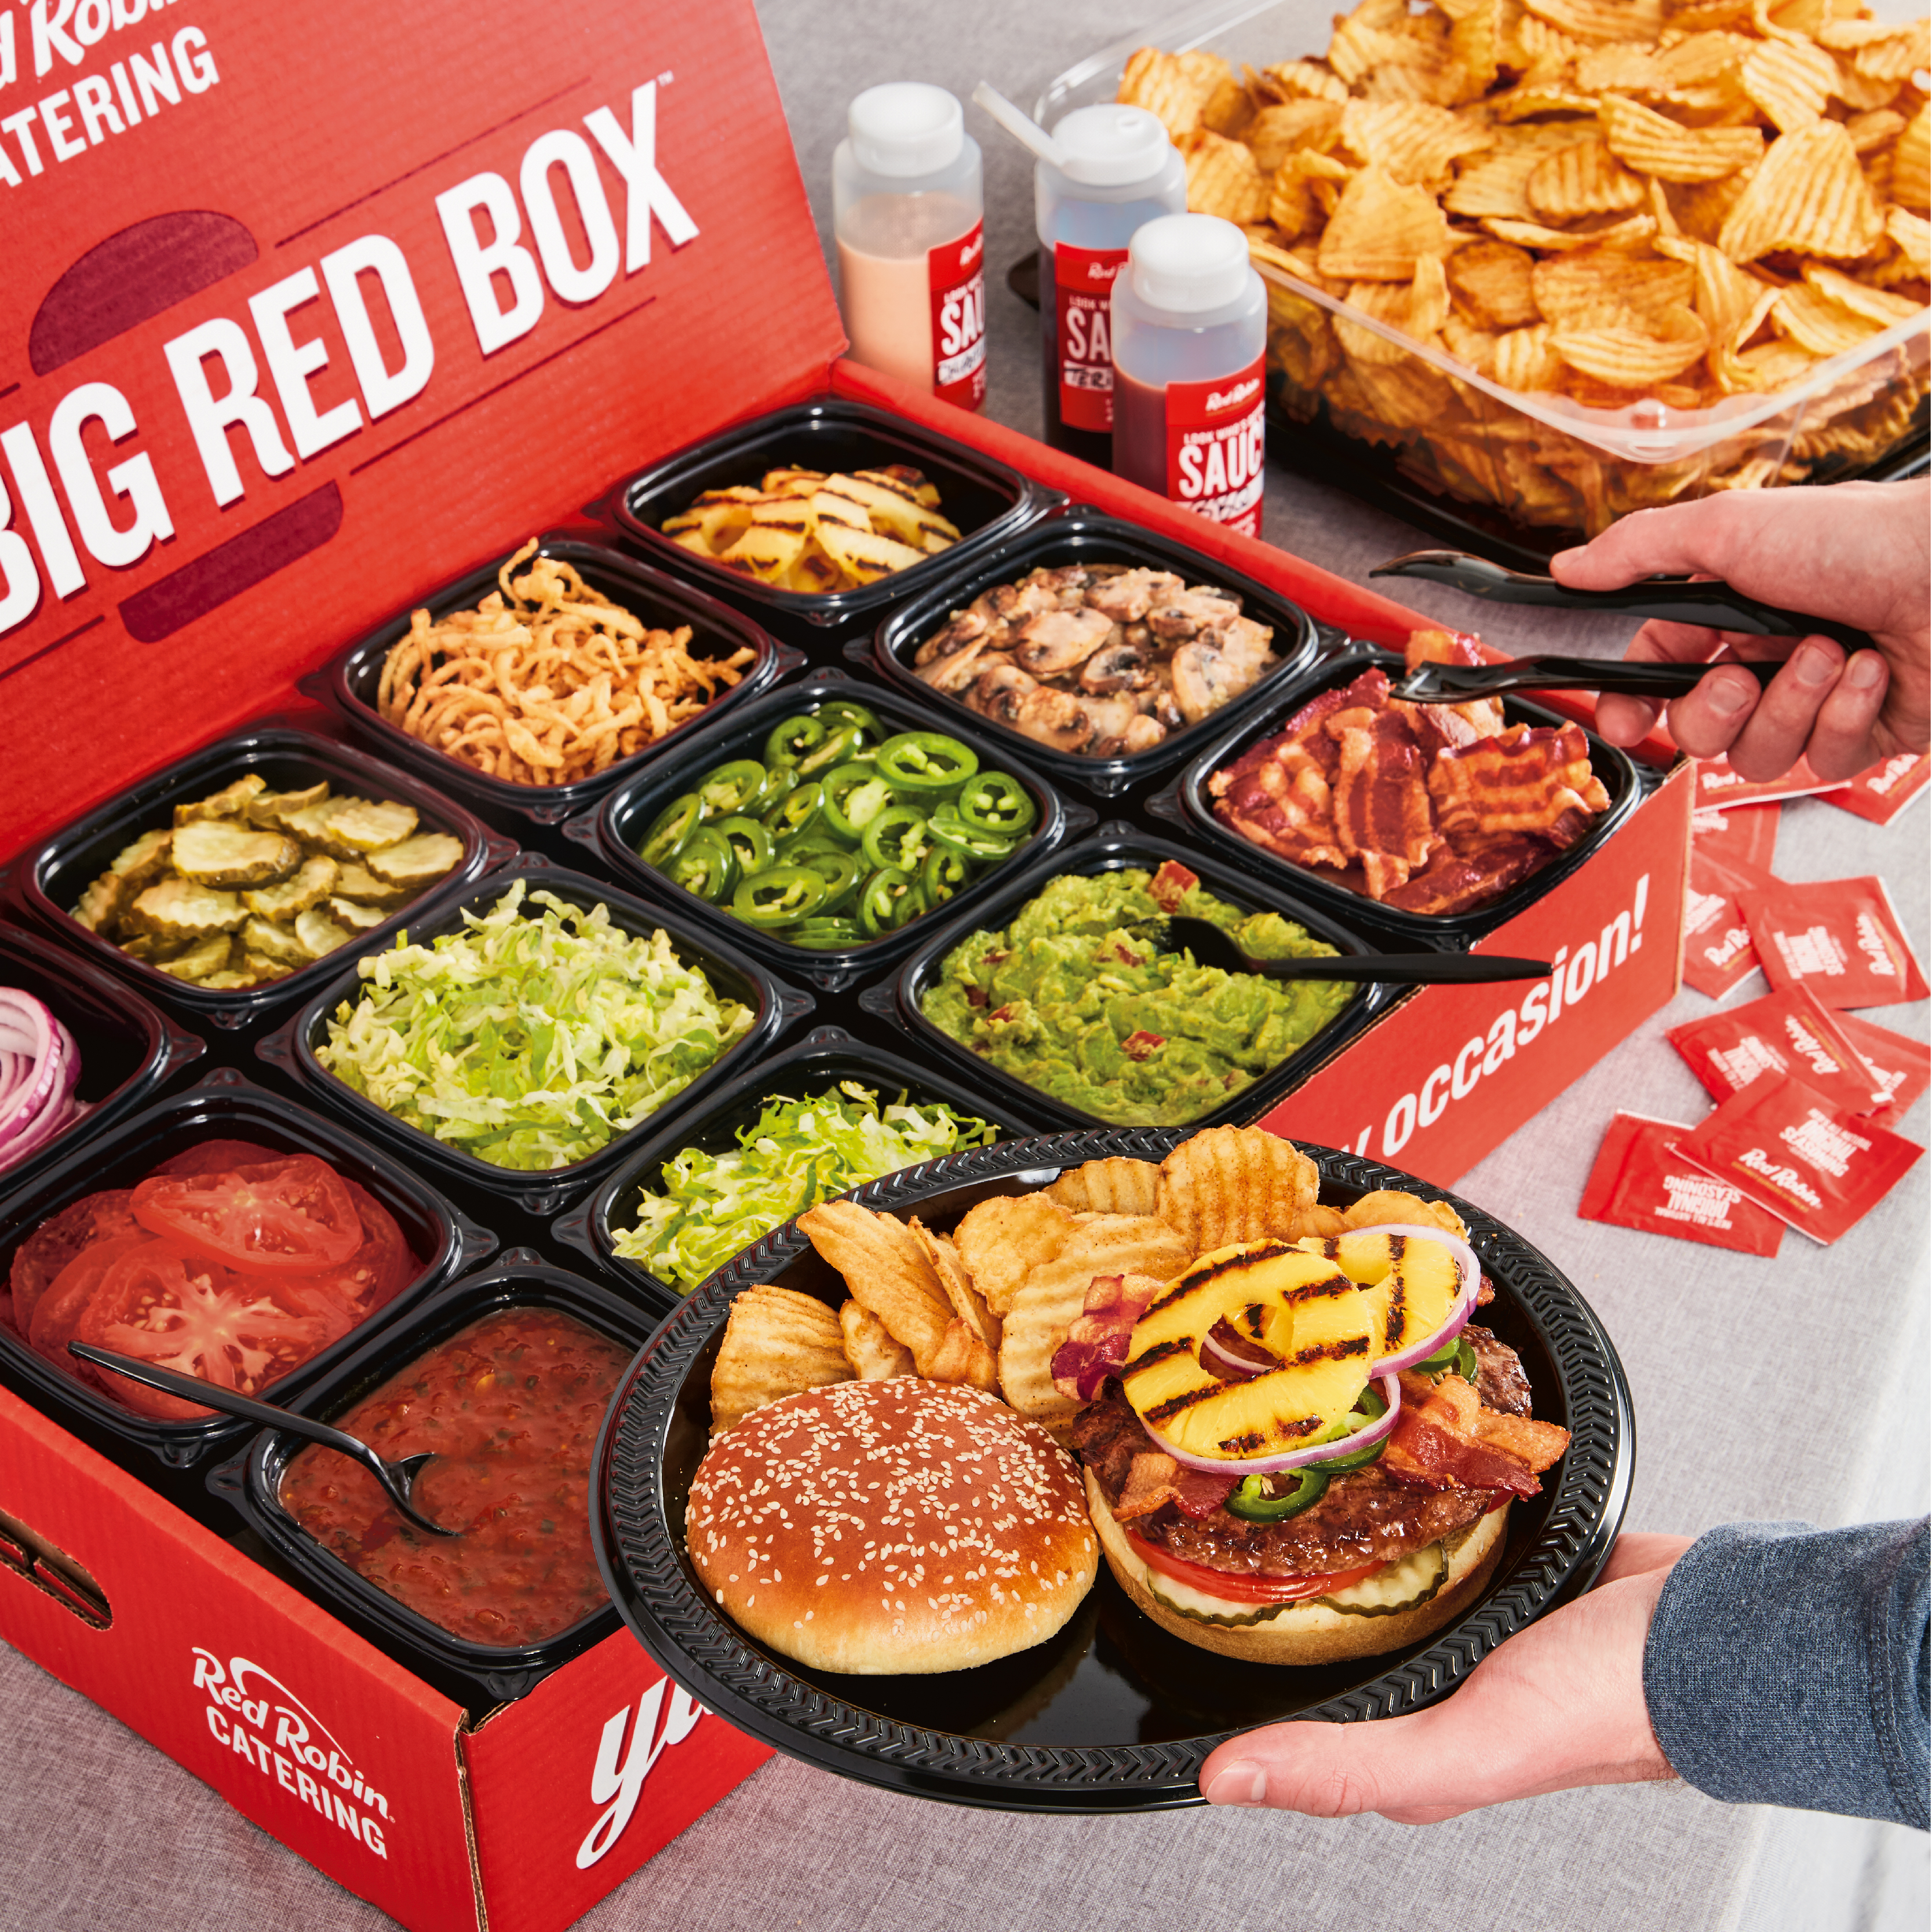 Online & Mobile Ordering Now Available for Red Robin Catering.